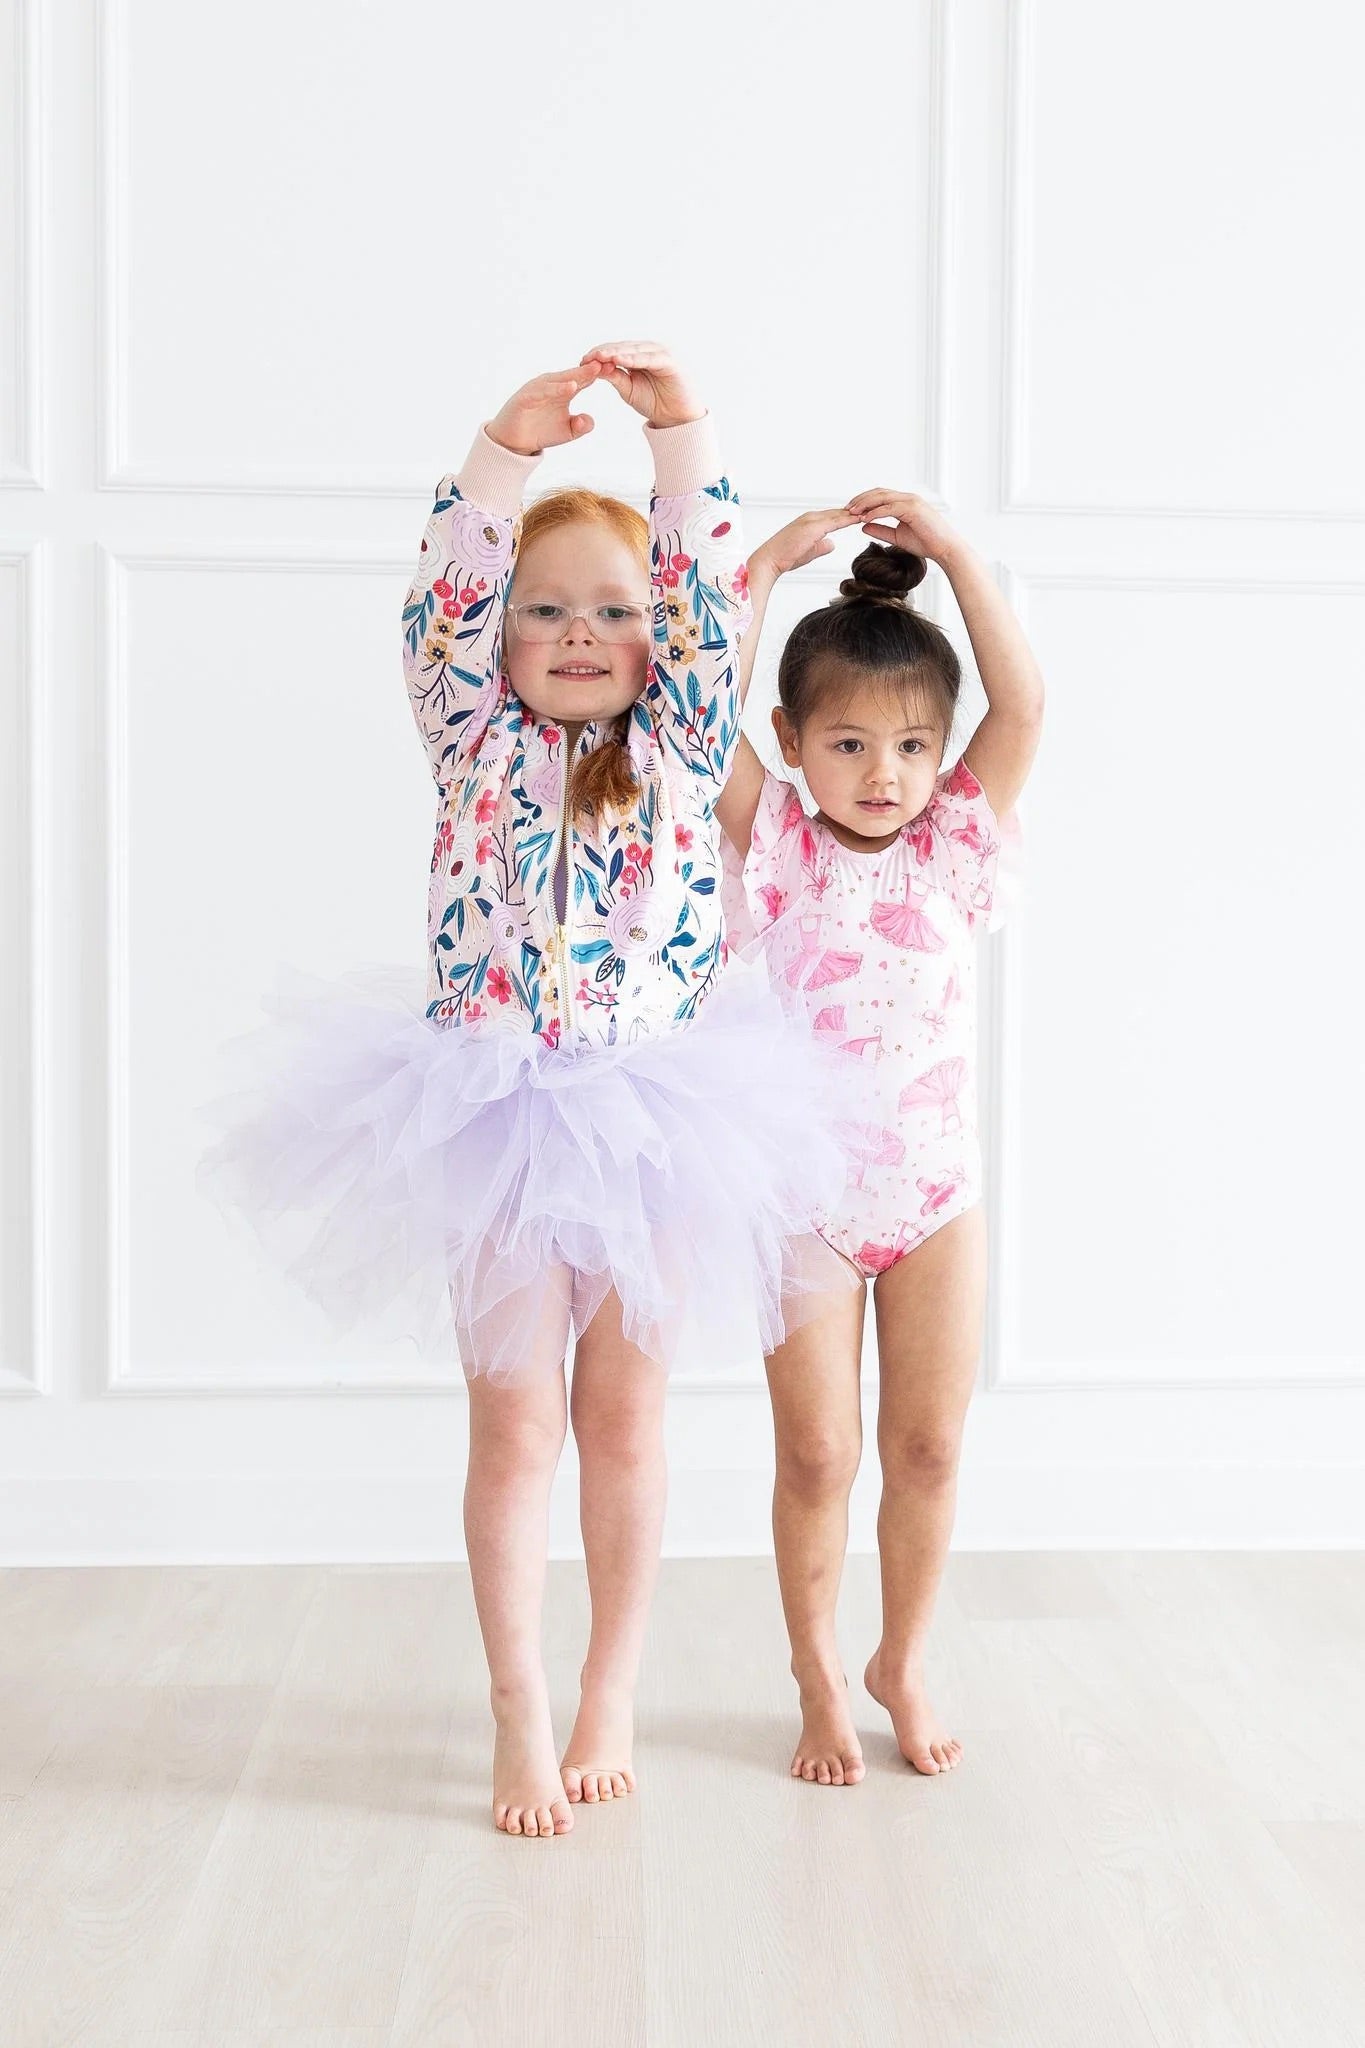 The Latest Girls’ Dancewear Trends You Need to Know About